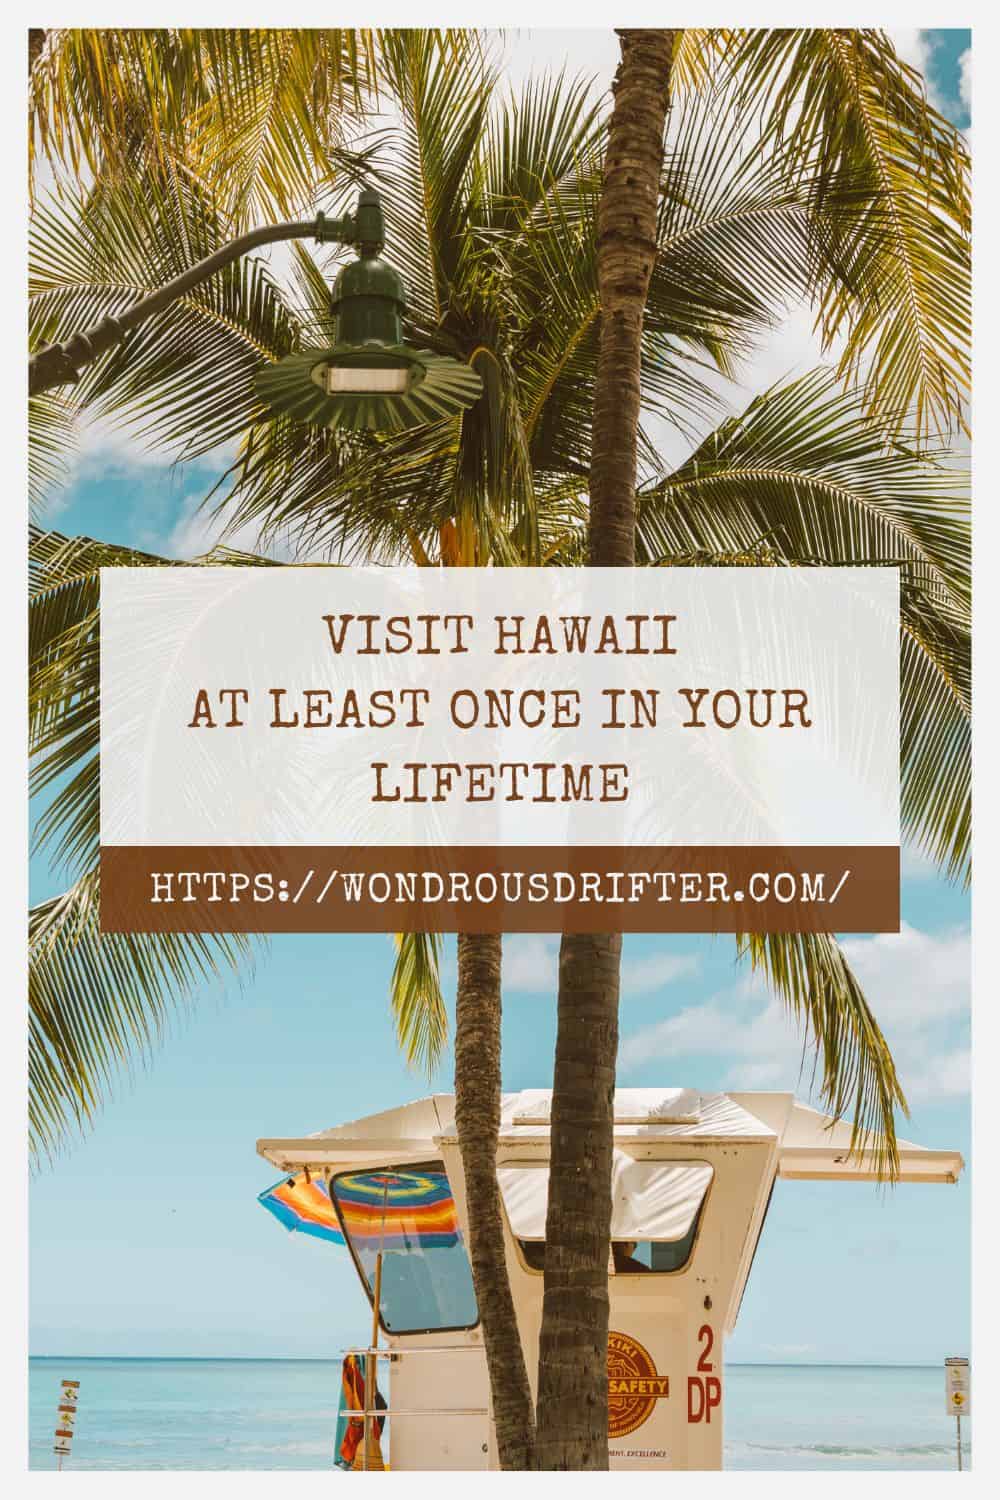 Visit Hawaii at least once in your lifetime